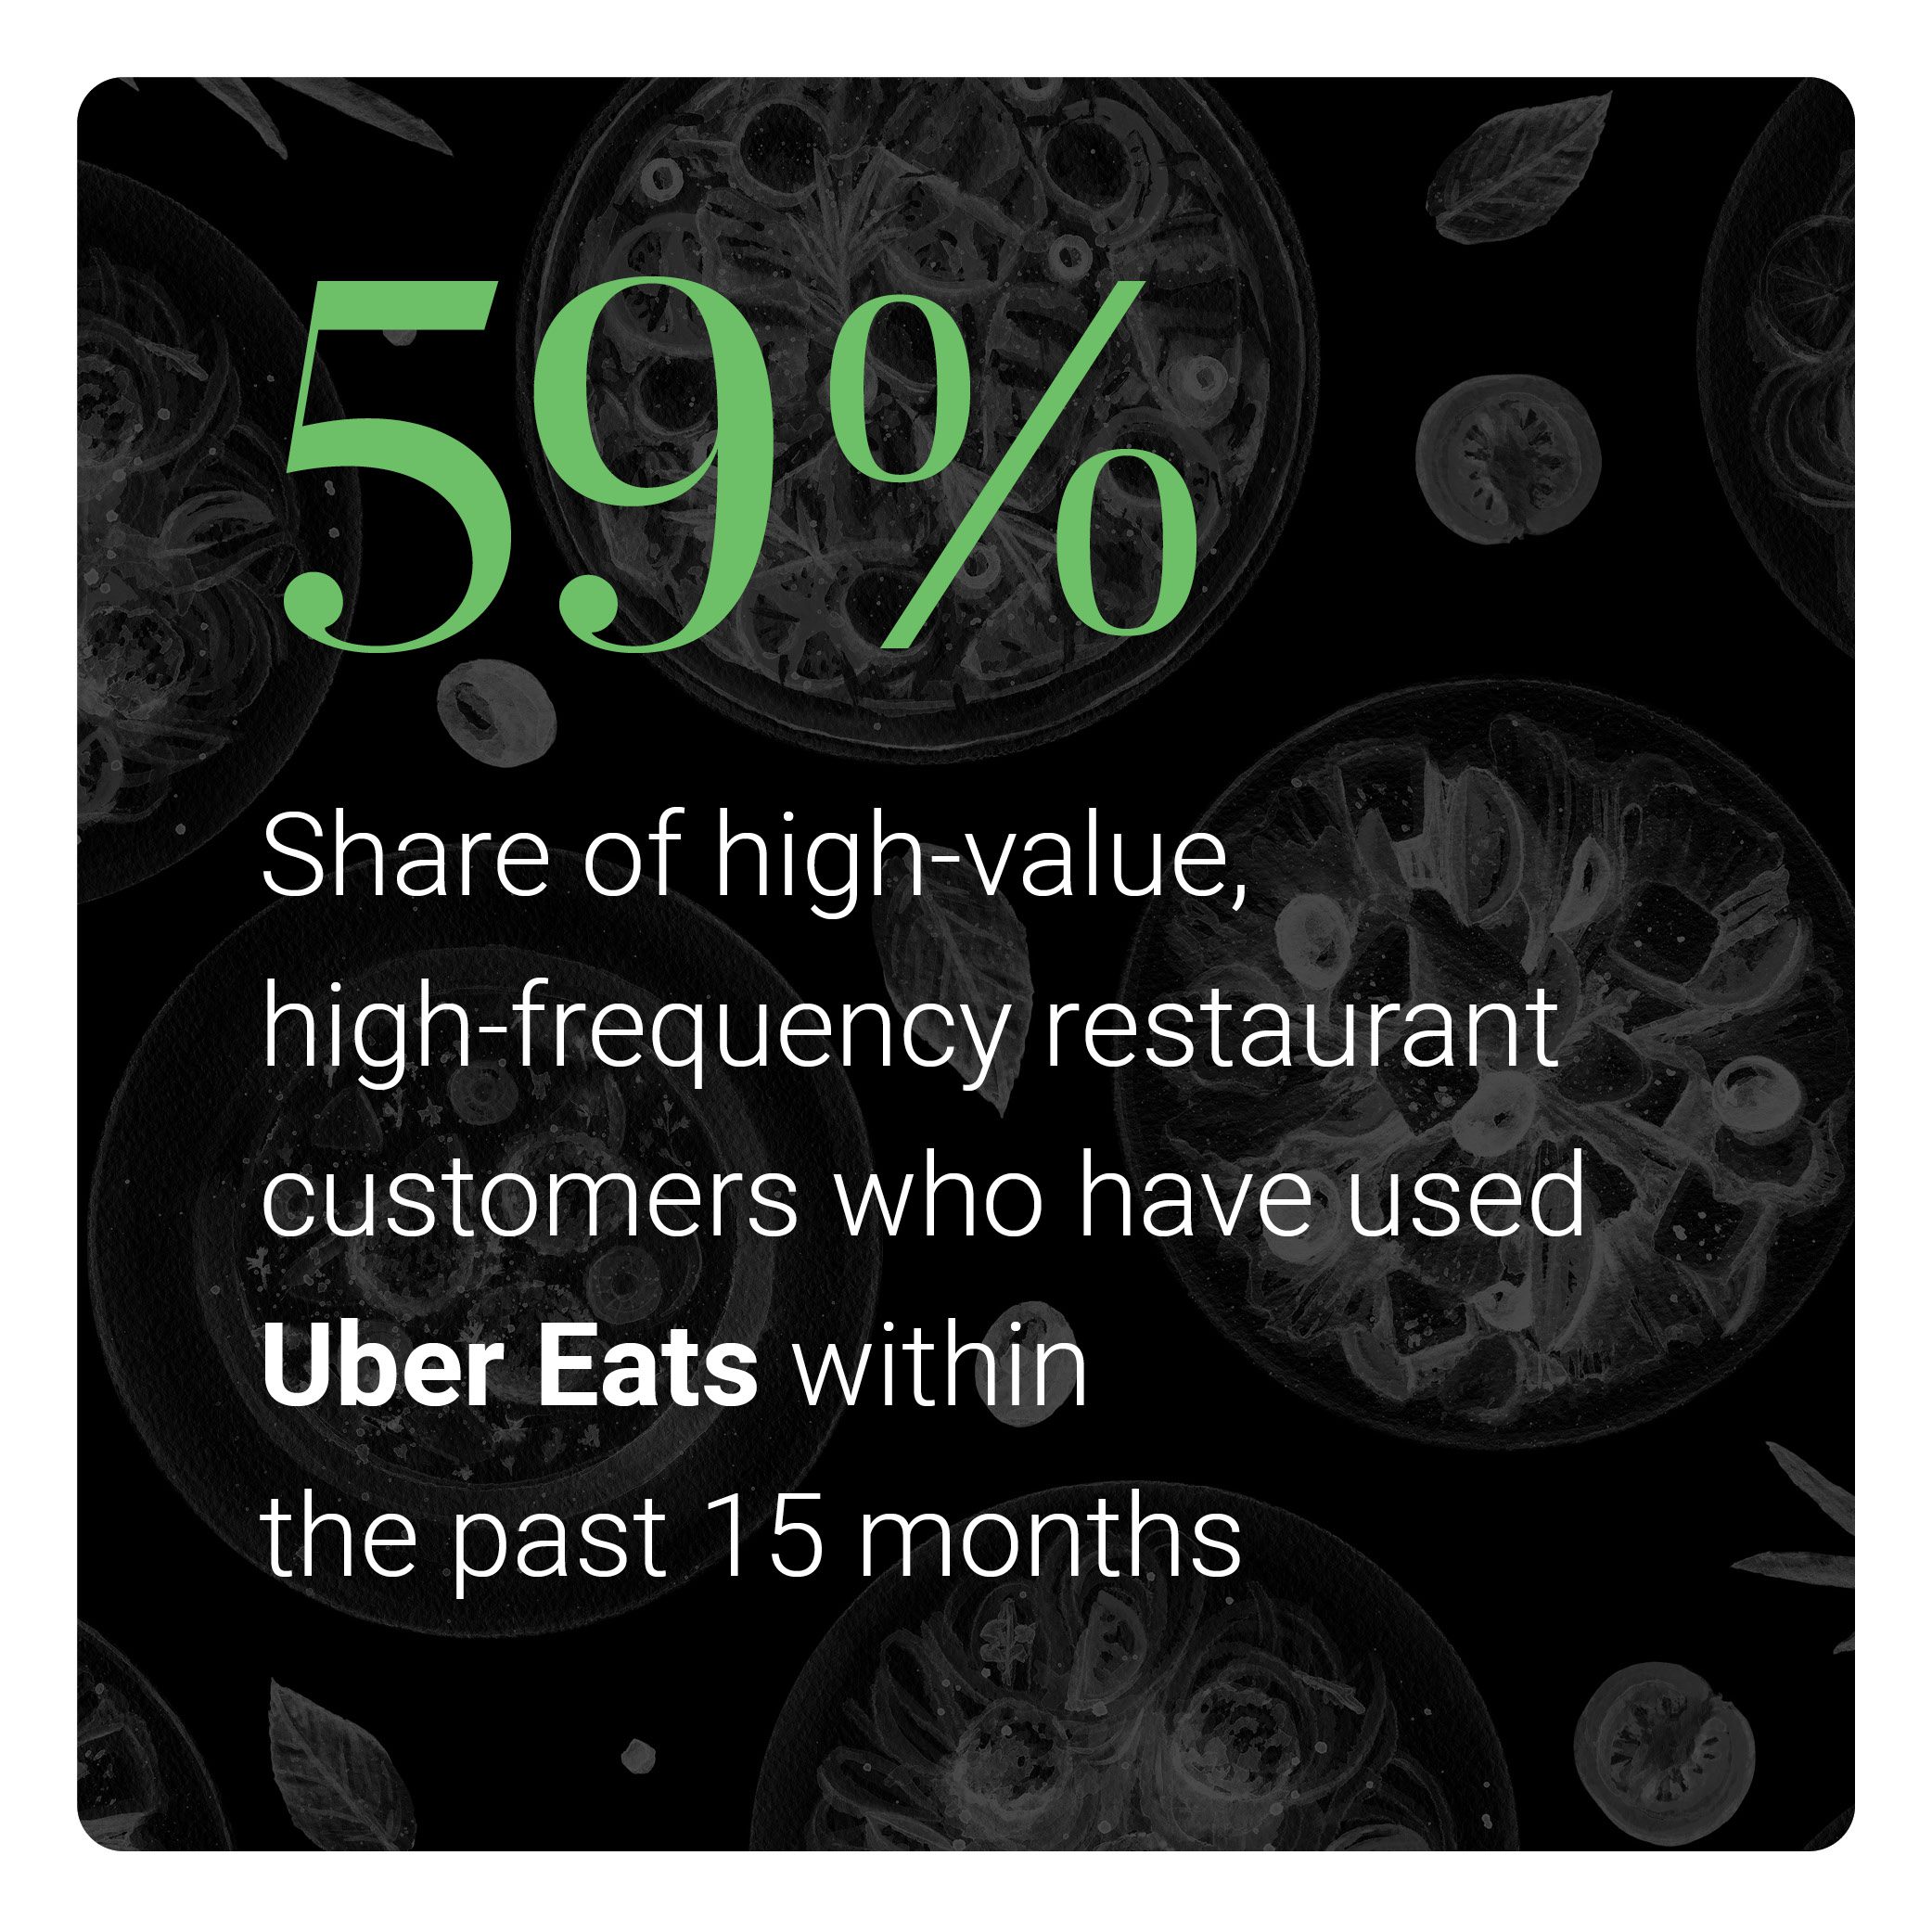 More than half of high-value, high-frequency restaurants customers have used Uber Eats in the last 15 months